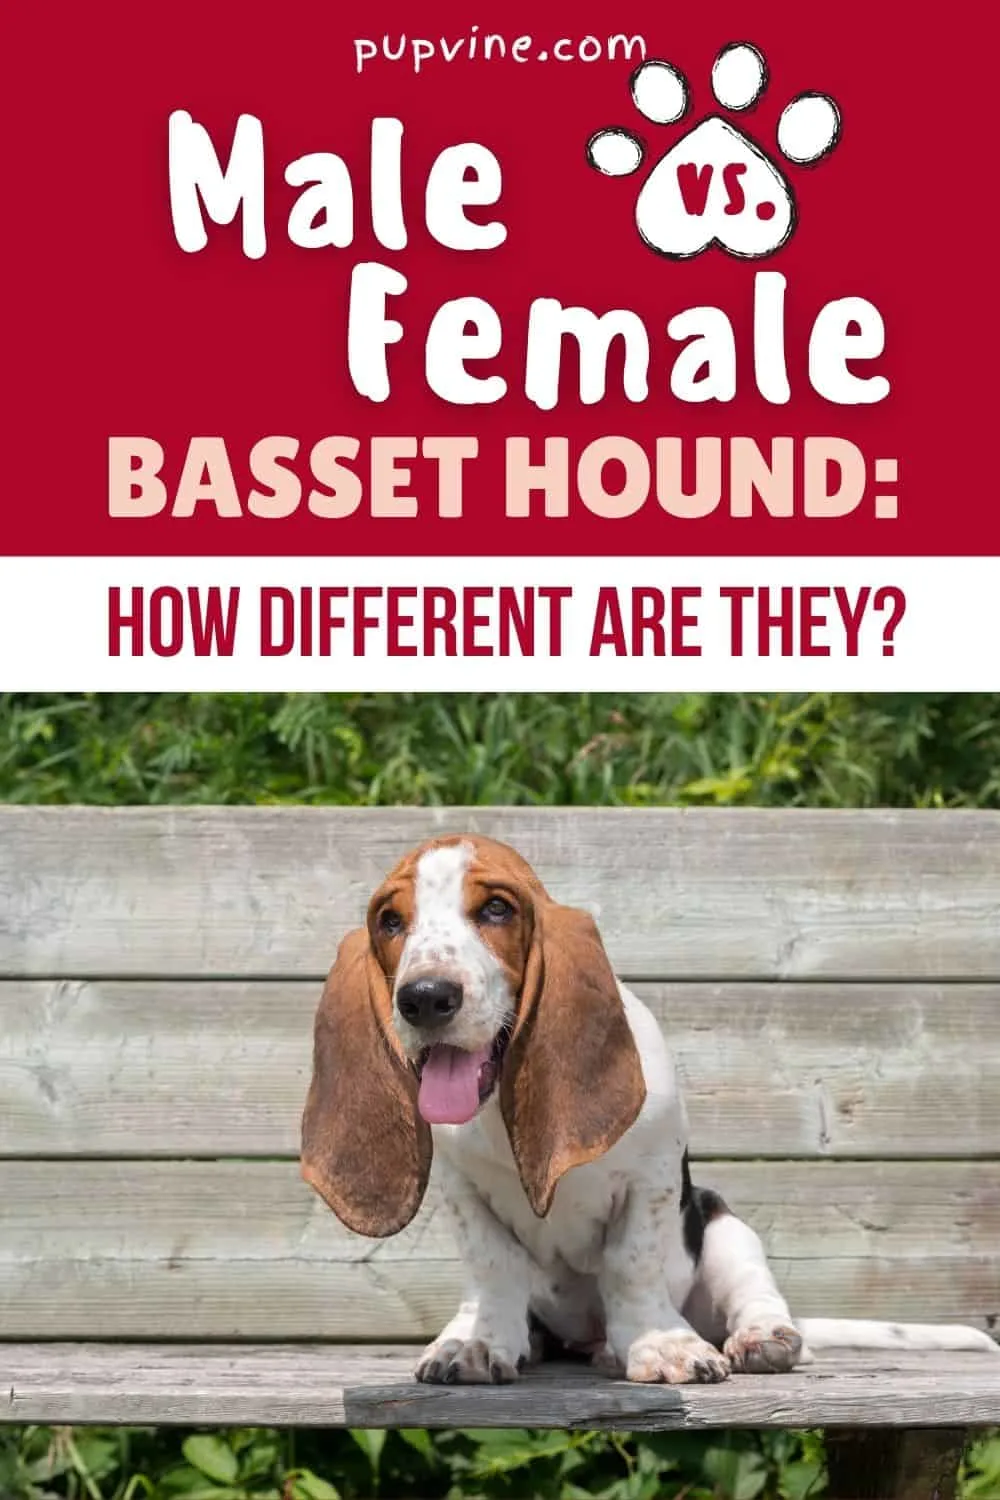 Male Vs. Female Basset Hound: How Different Are They?